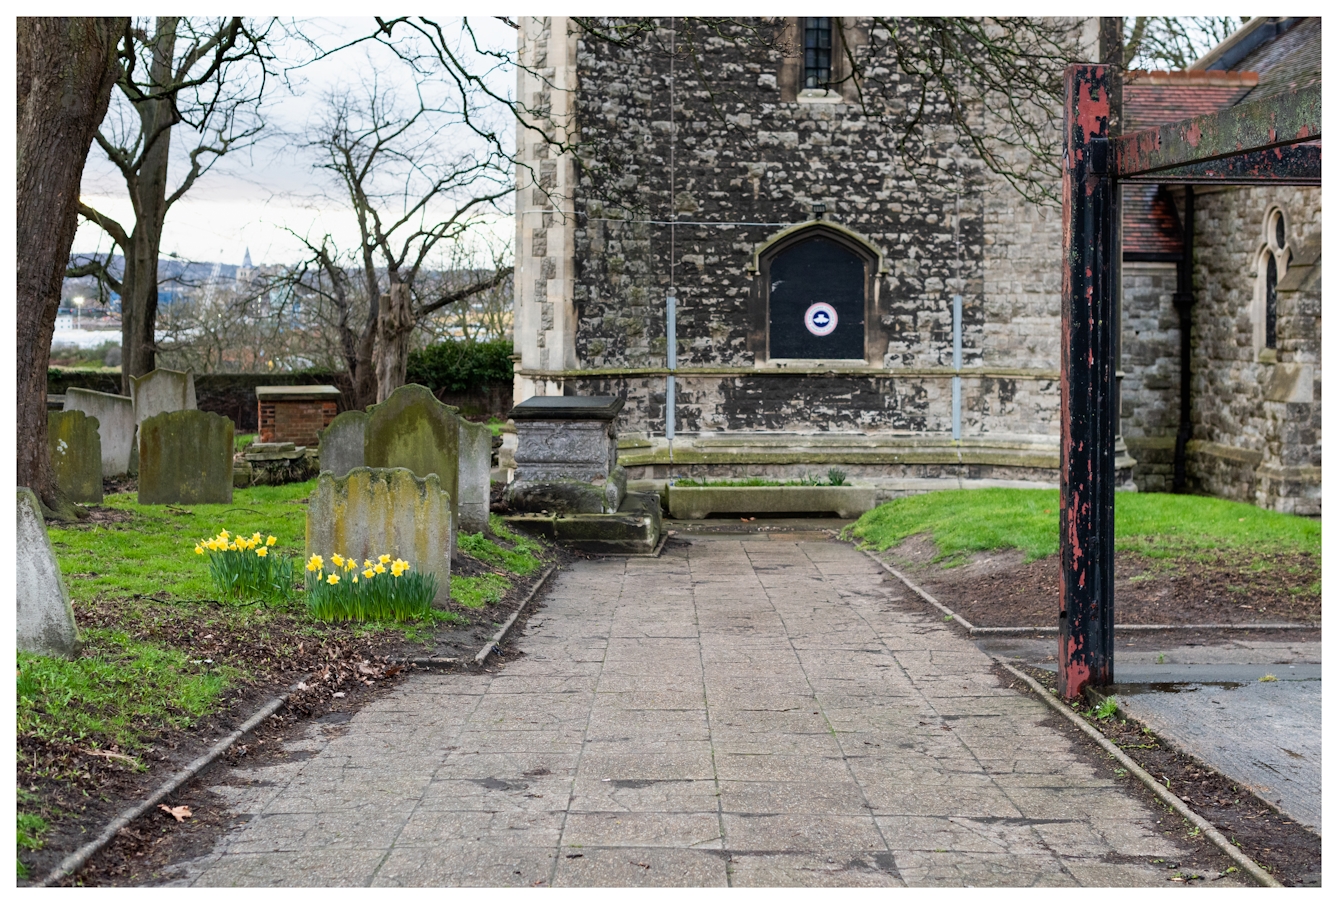 Photograph of a churchyard with the church buildings and leafless trees in the background. In the foreground there are a number of gravestones and grassed areas. To the centre left is small crop of bright yellow daffodils.